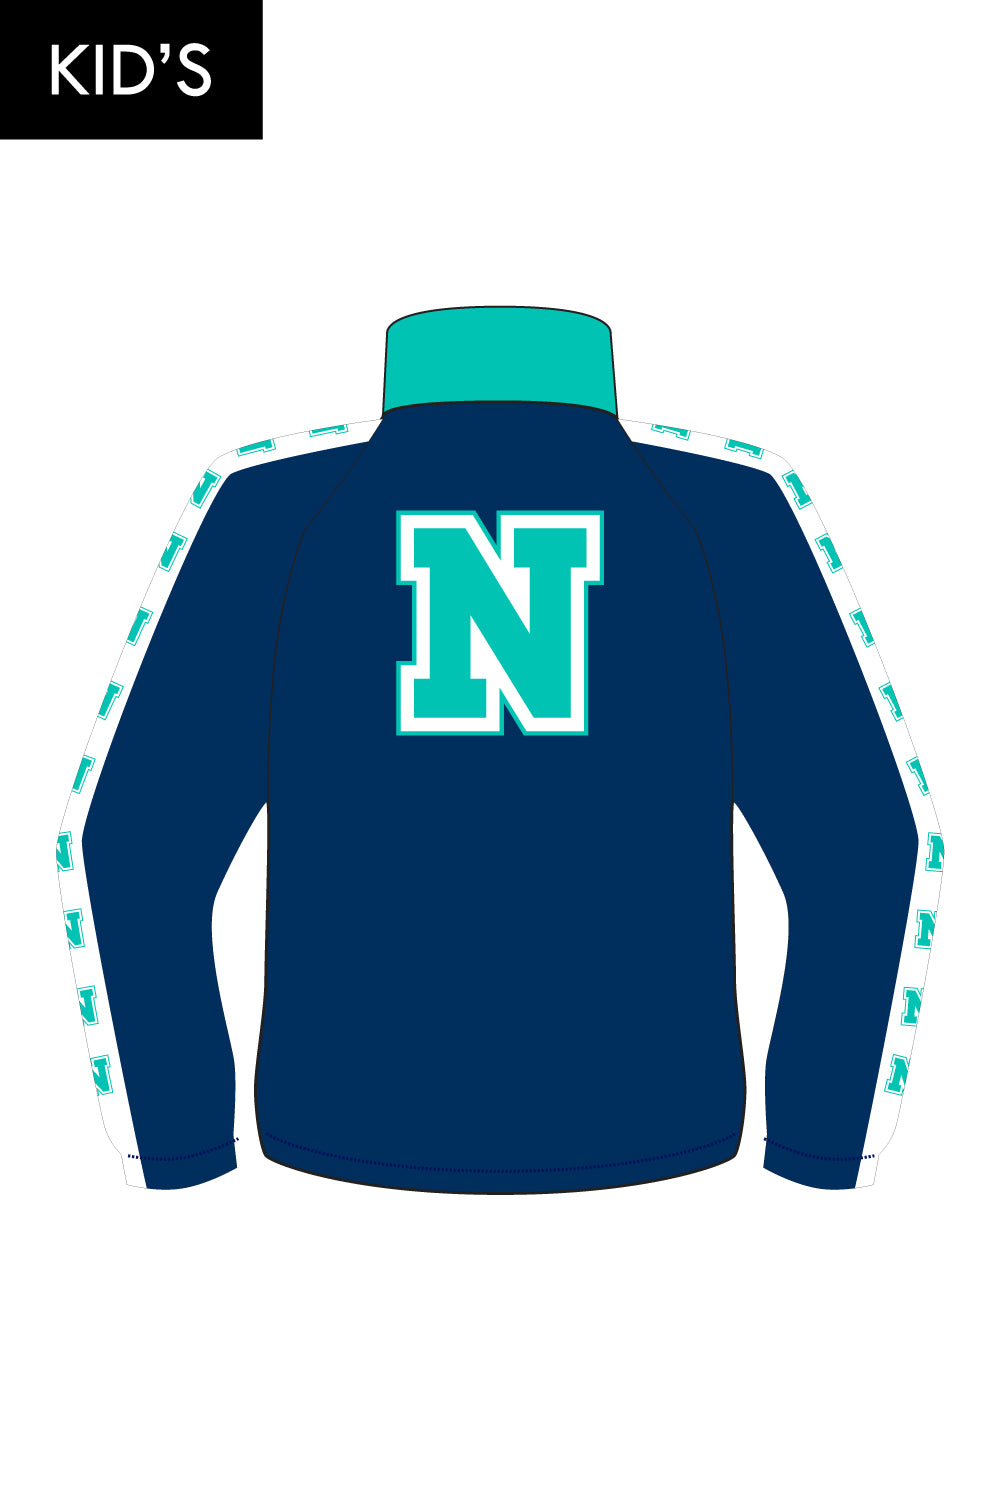 Narrabeen Swimming Team Tracksuit Kid's Jacket